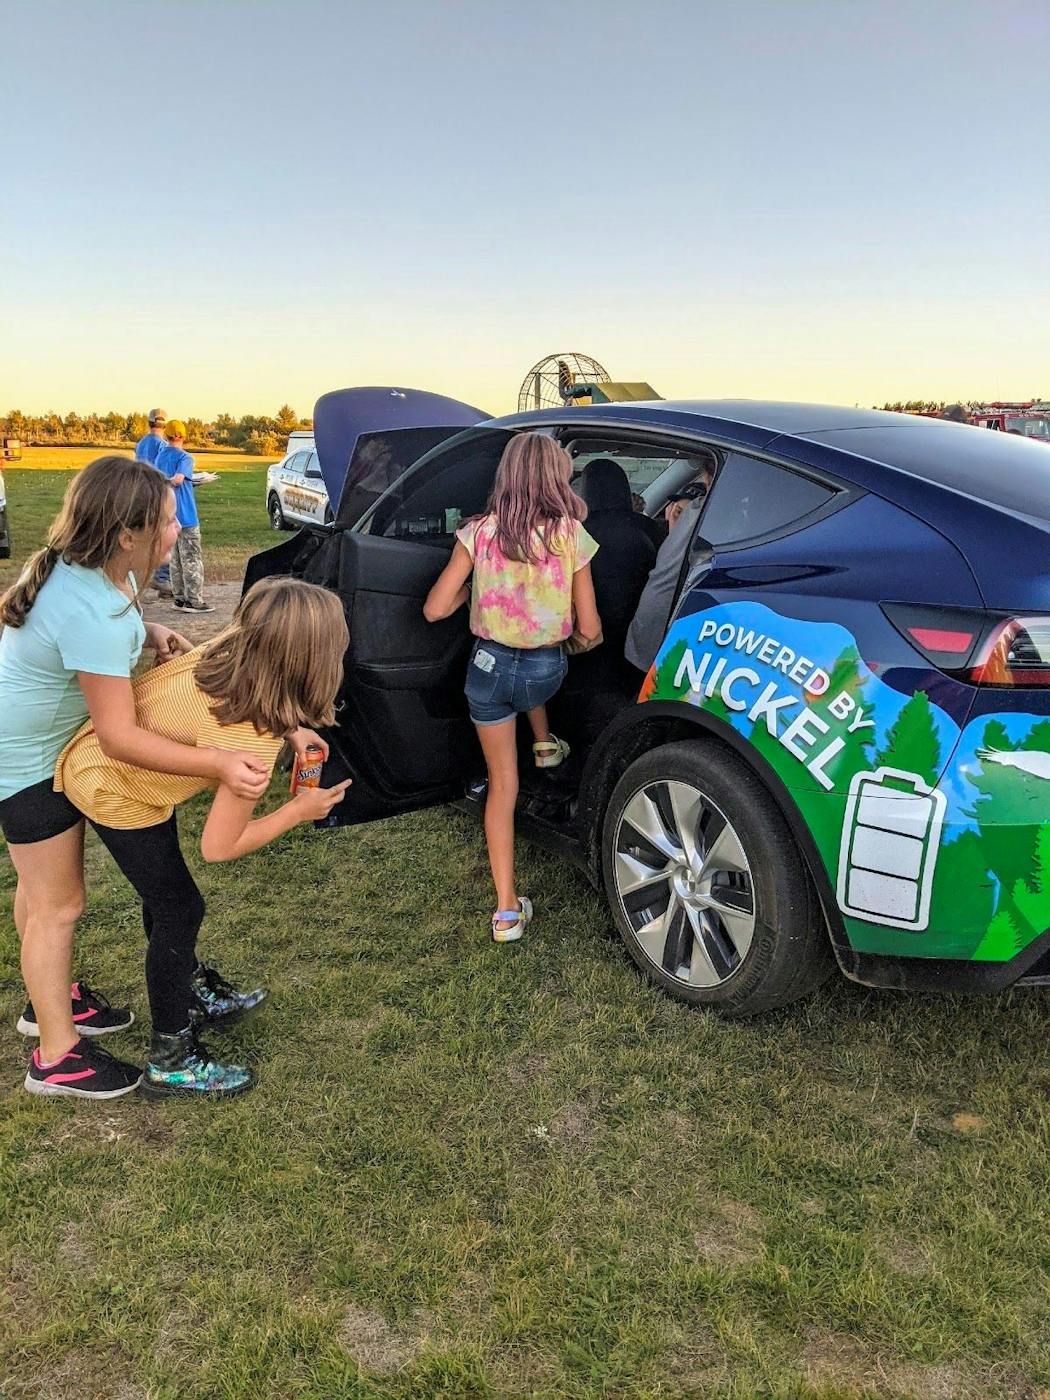 Children played near a battery-powered Tesla vehicle at a summer festival near Tamarack, Mn., and the proposed site of the Talon Metals nickel mine in northern Minnesota.